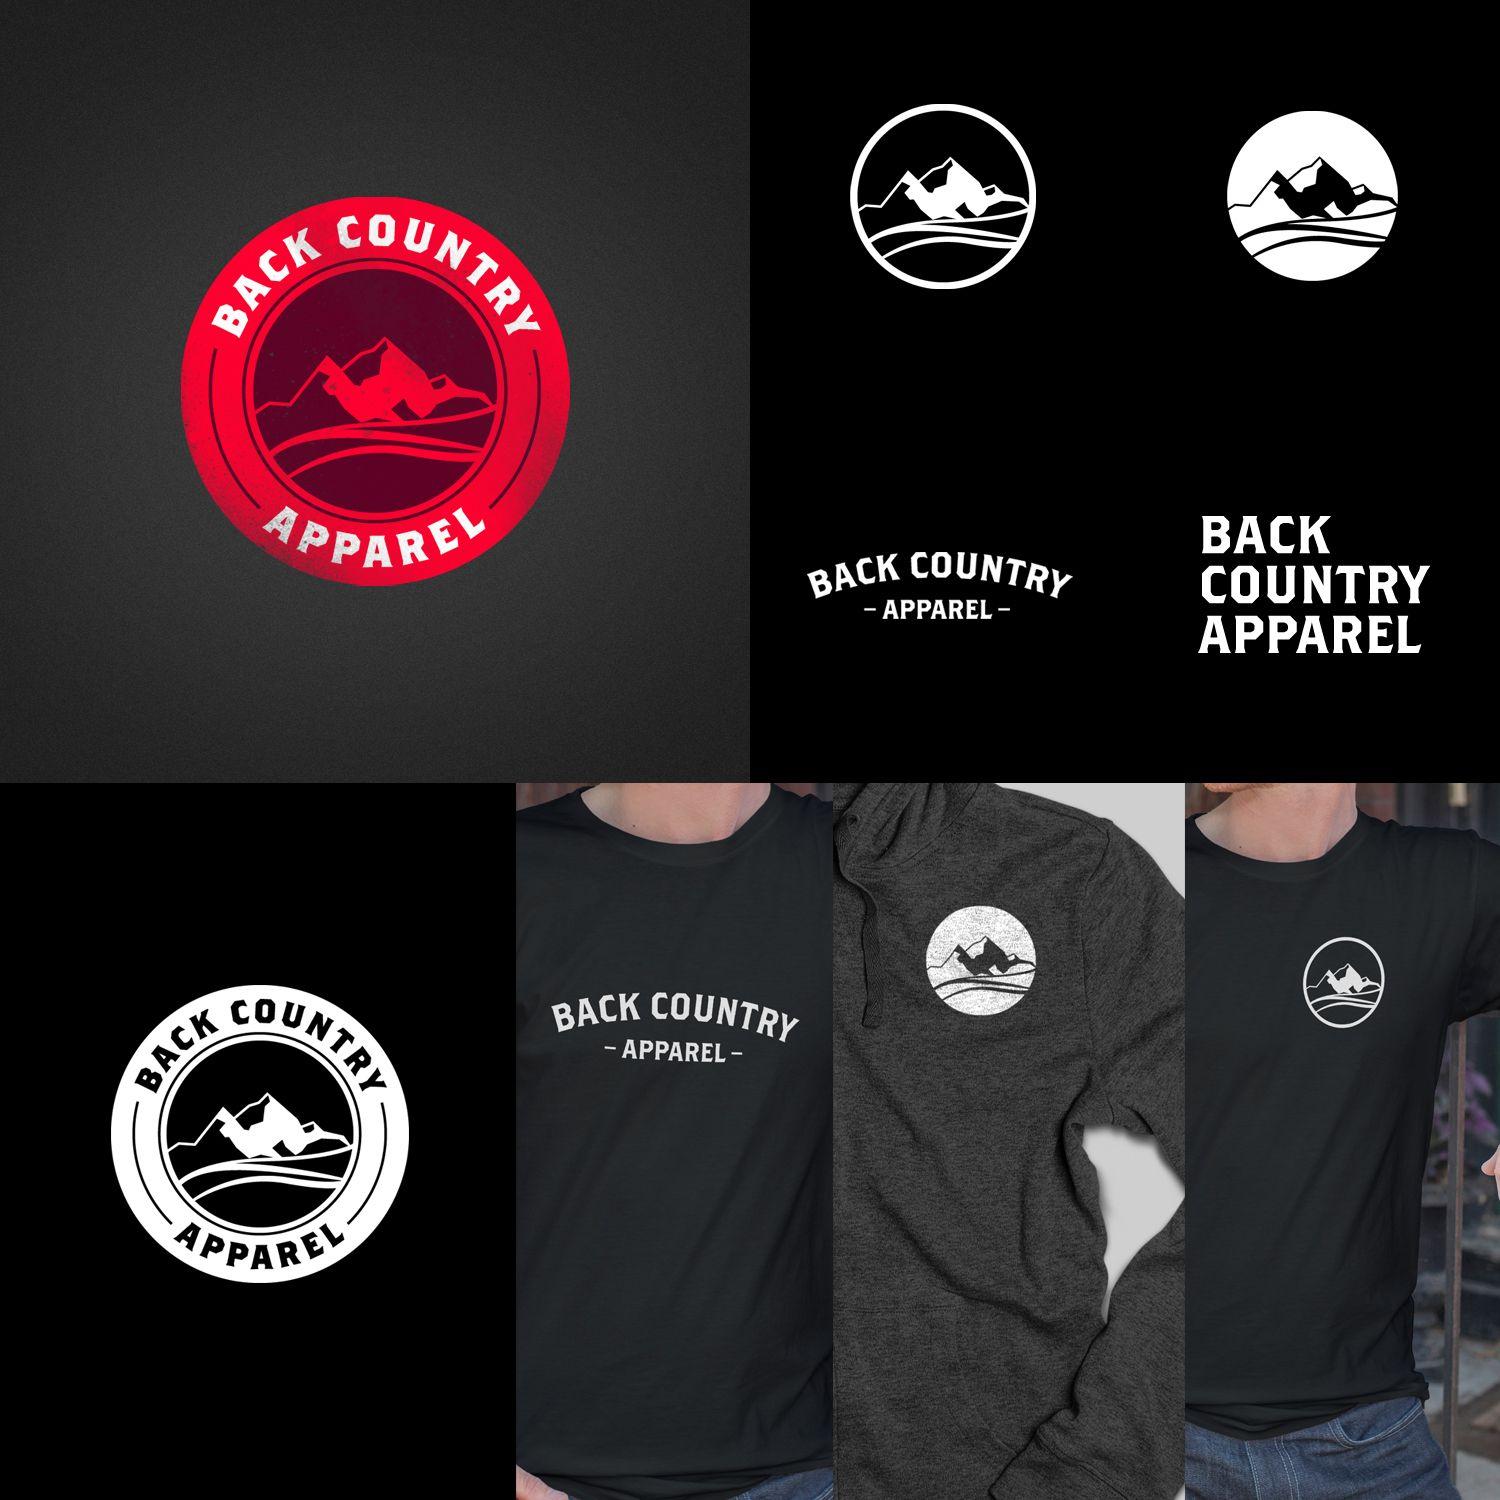 Apparel Company Logo - Playful, Modern, It Company Logo Design for Back Country Apparel by ...